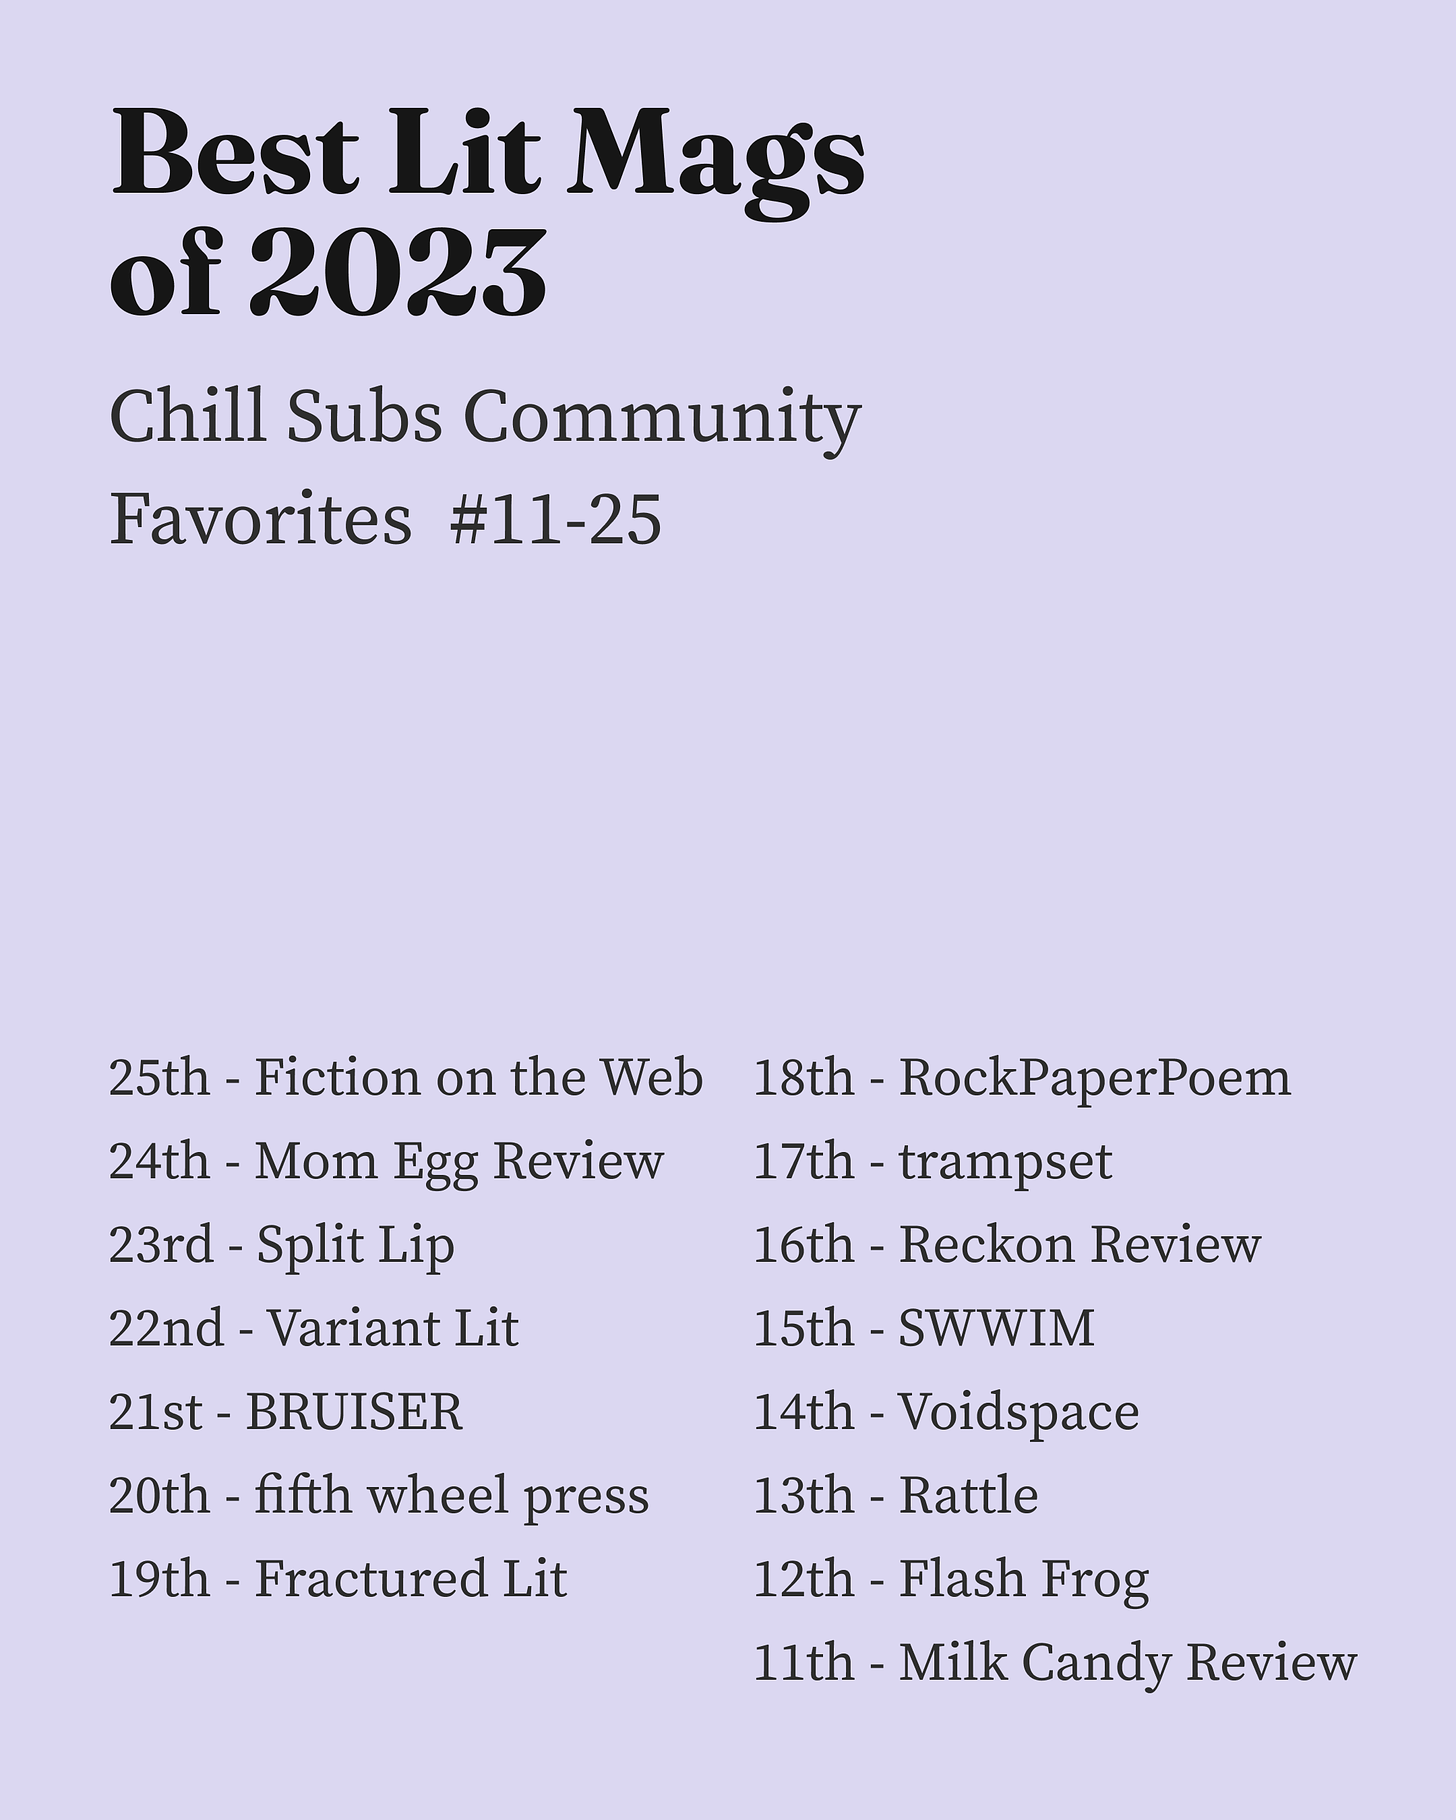 Best Lit Mags
of 2023

Chill Subs Community Favorites  #11-25

25th - Fiction on the Web
24th - Mom Egg Review
23rd - Split Lip
22nd - Variant Lit
21st - BRUISER
20th - fifth wheel press
19th - Fractured Lit
18th - RockPaperPoem
17th - trampset
16th - Reckon Review
15th - SWWIM
14th - Voidspace
13th - Rattle
12th - Flash Frog 
11th - Milk Candy Review